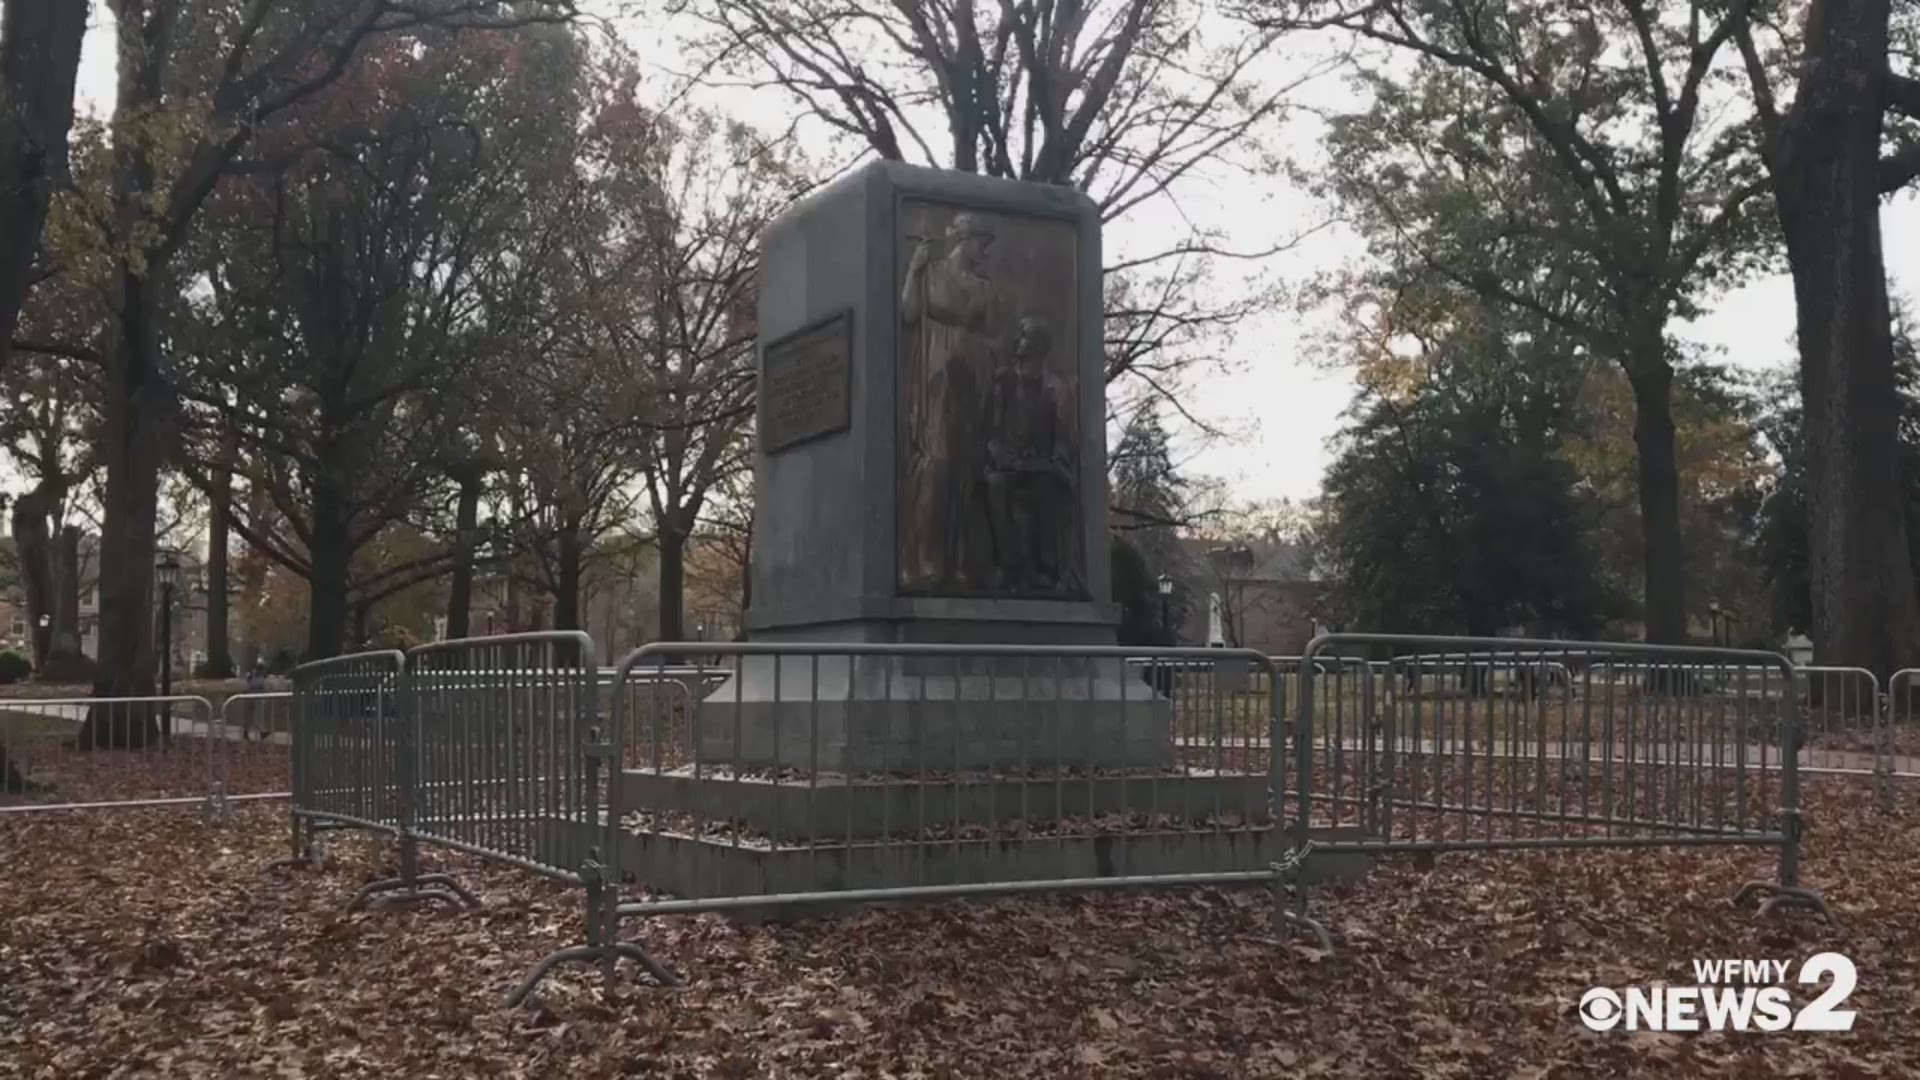 University of North Carolina at Chapel Hill Chancellor Carol Folt announced Monday that the school is recommending that they keep the "Silent Sam" Confederate statue on campus and in a new building